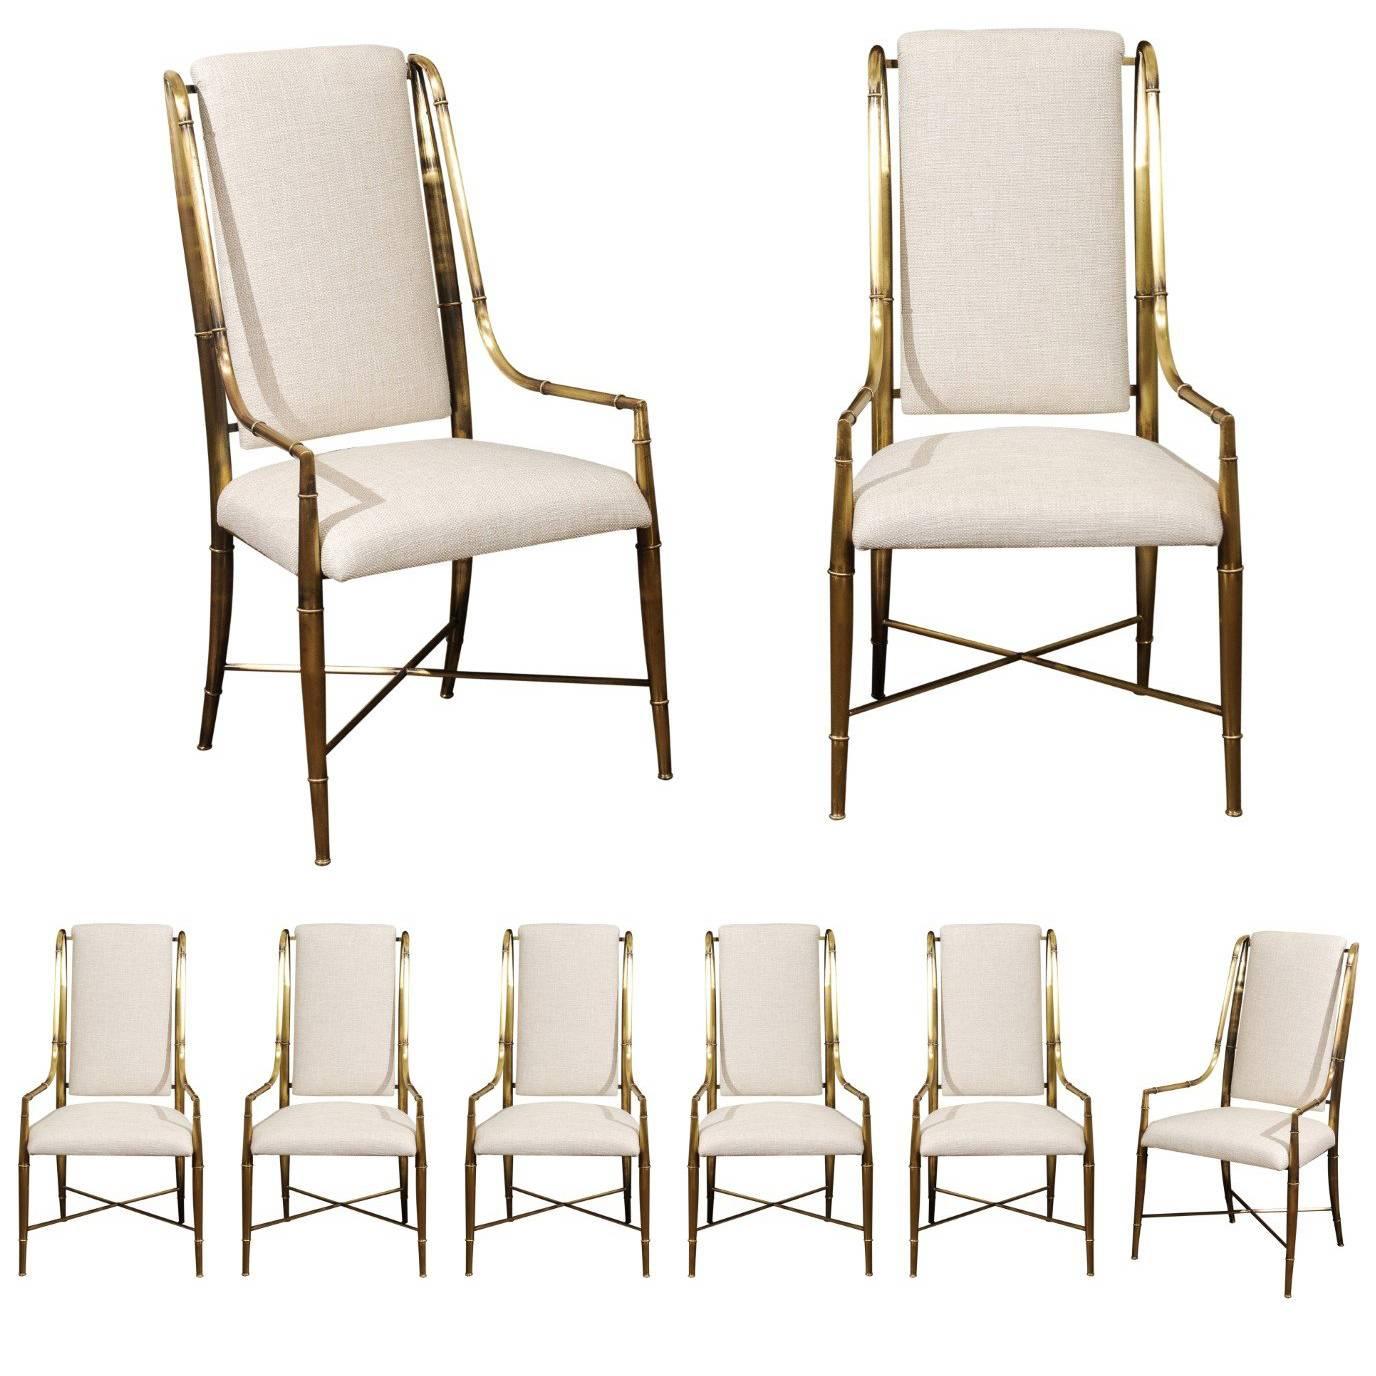 Magnificent Set of Ten Dining Chairs by Weiman/Warren Lloyd for Mastercraft